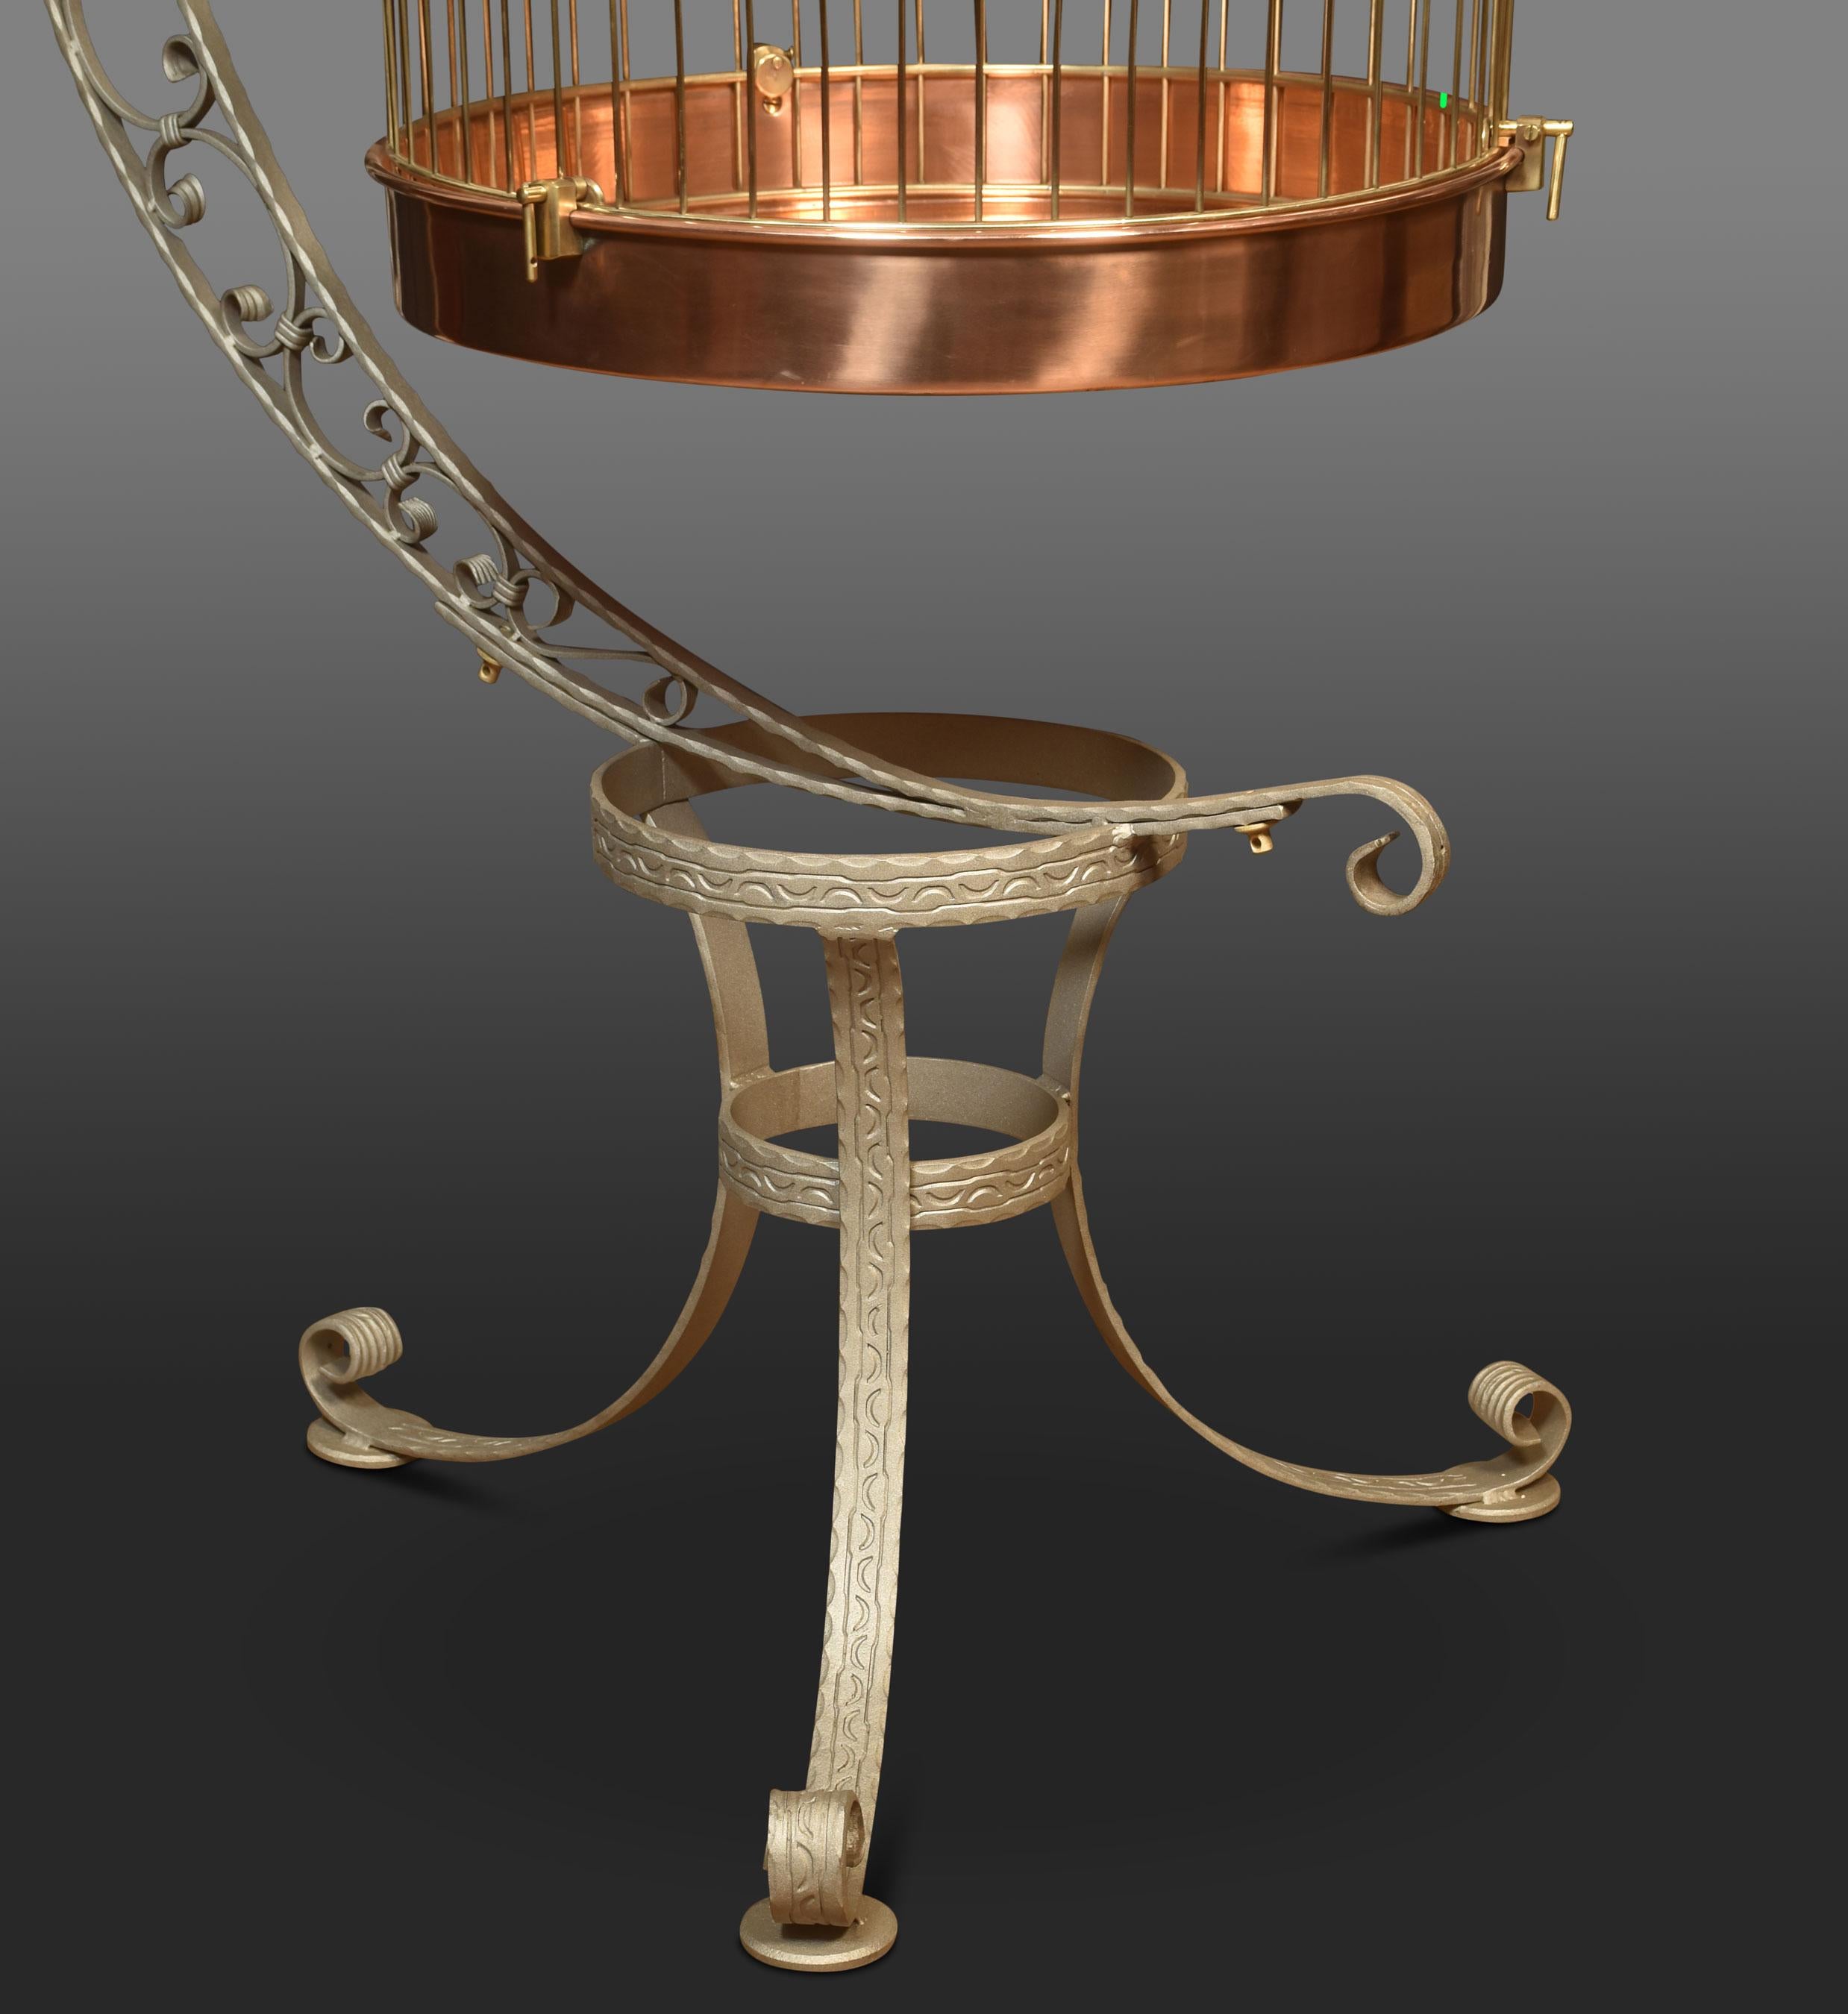 Substantial brass birdcage or aviary, having a dome-shaped cage with copper bottom supported on wrought iron frame with scrolling decoration.
Dimensions
Height 74 inches
Width 32 inches
Depth 41 inches

Cage Dimensions

Height 40